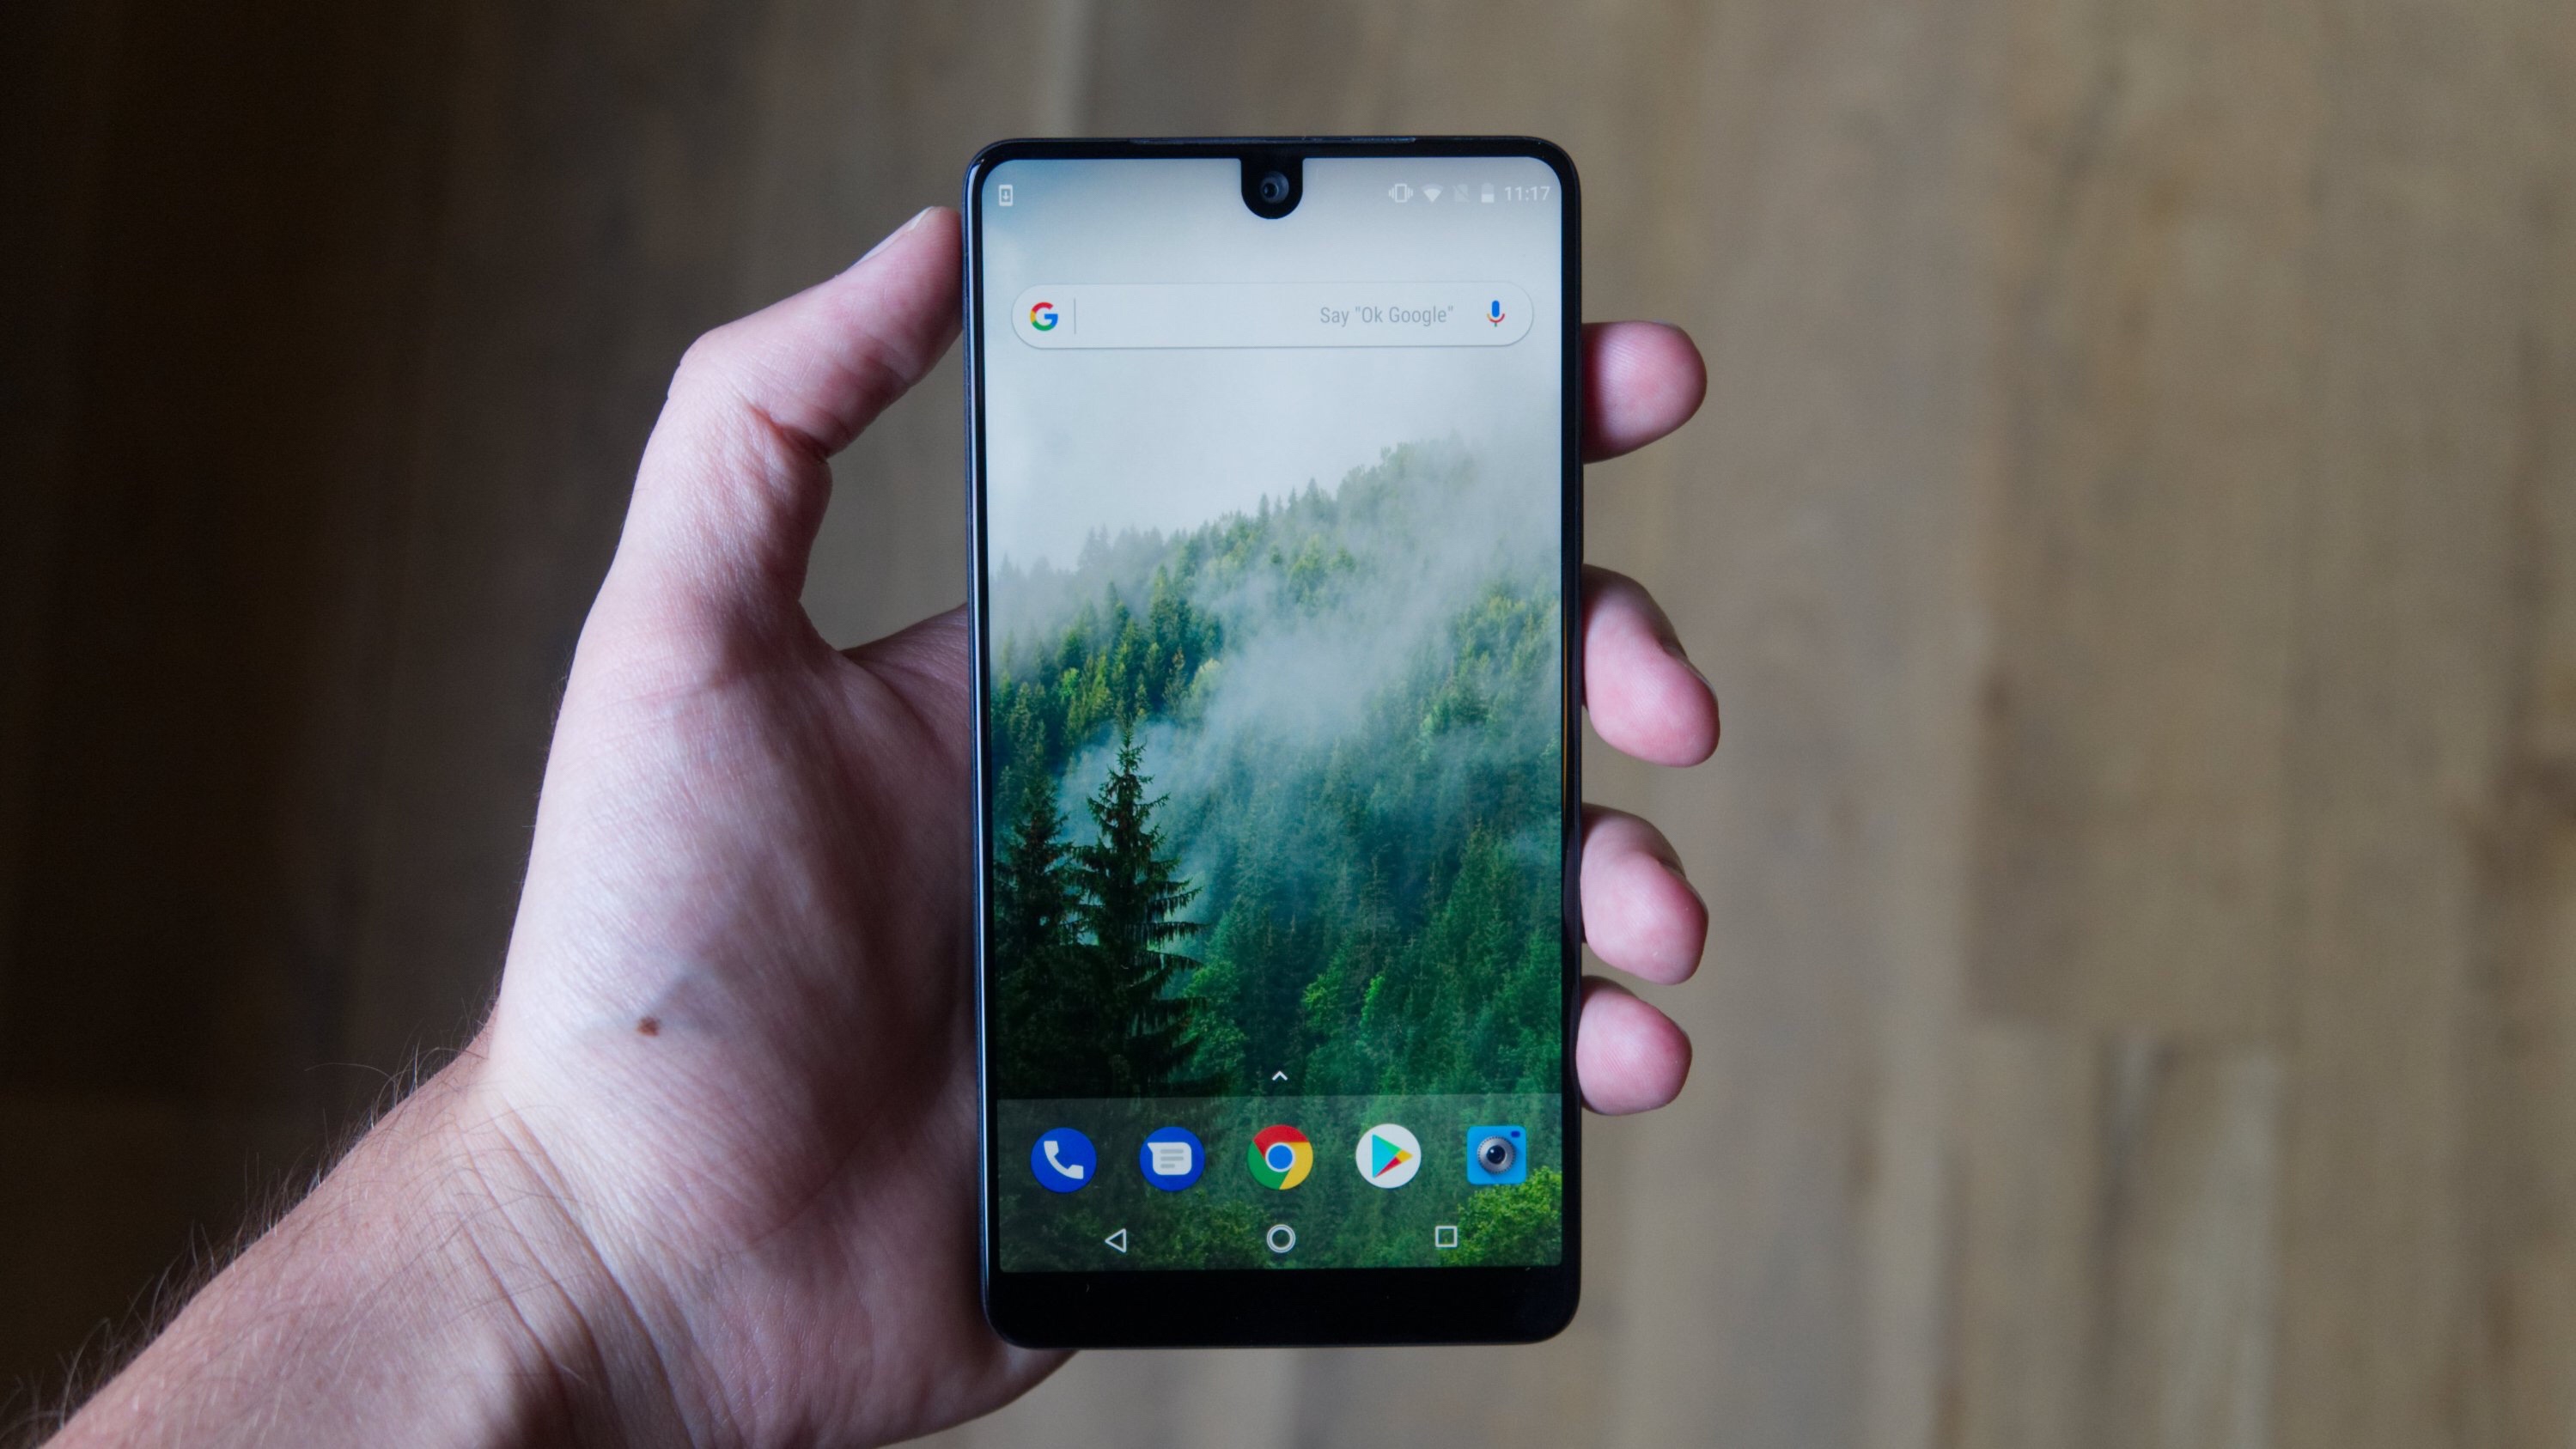 Essential finally brings Android Oreo 8.1 to its phones